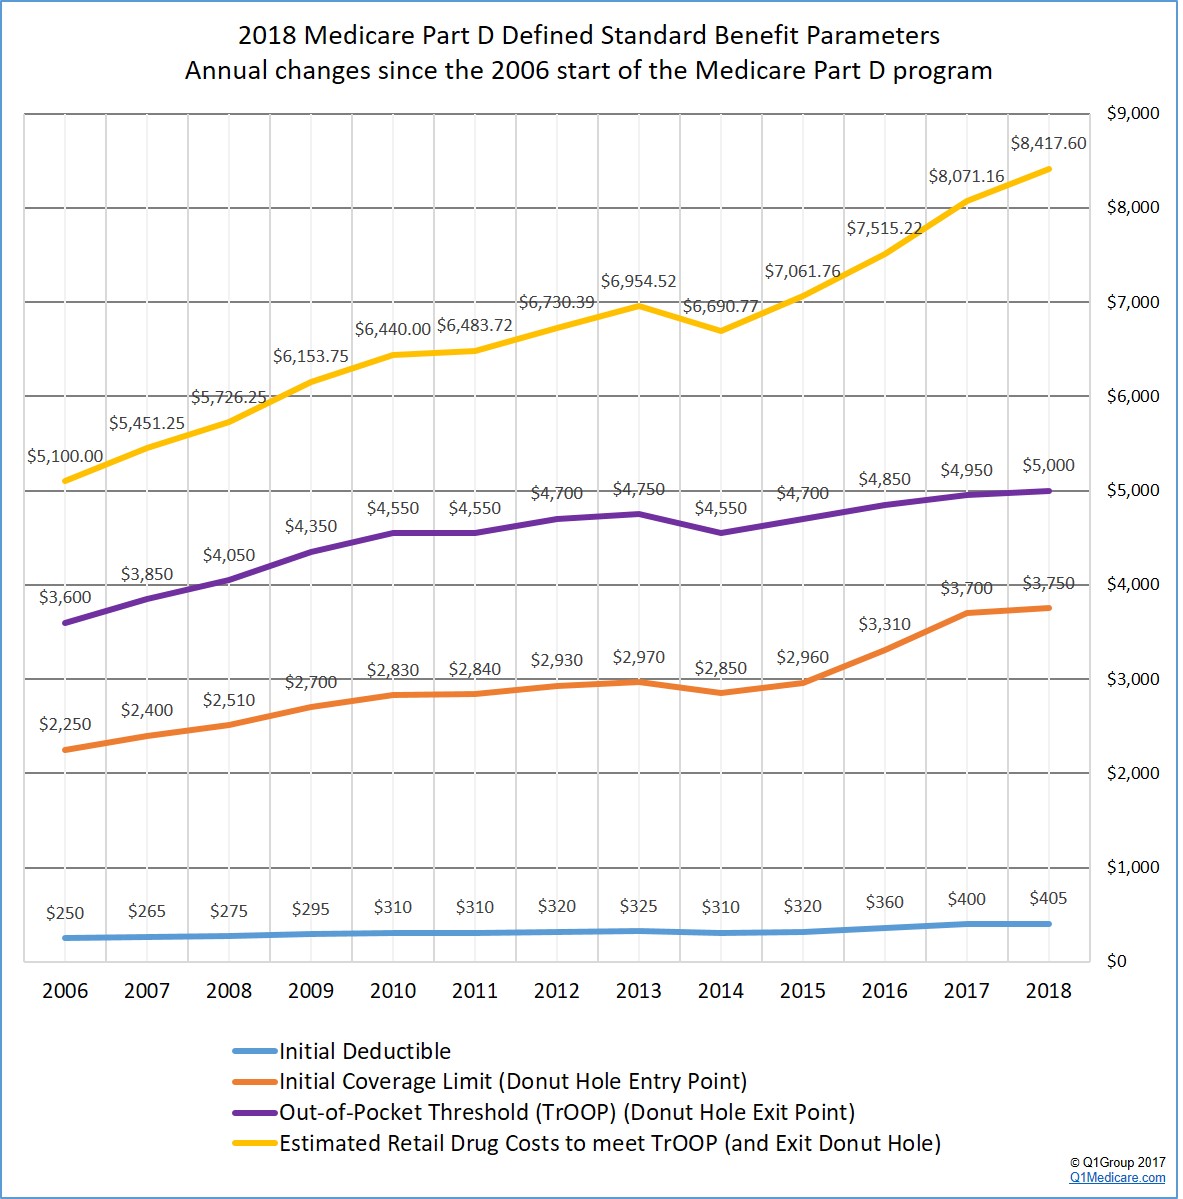 Changes in the standard Medicare Part D plan coverage since 2006